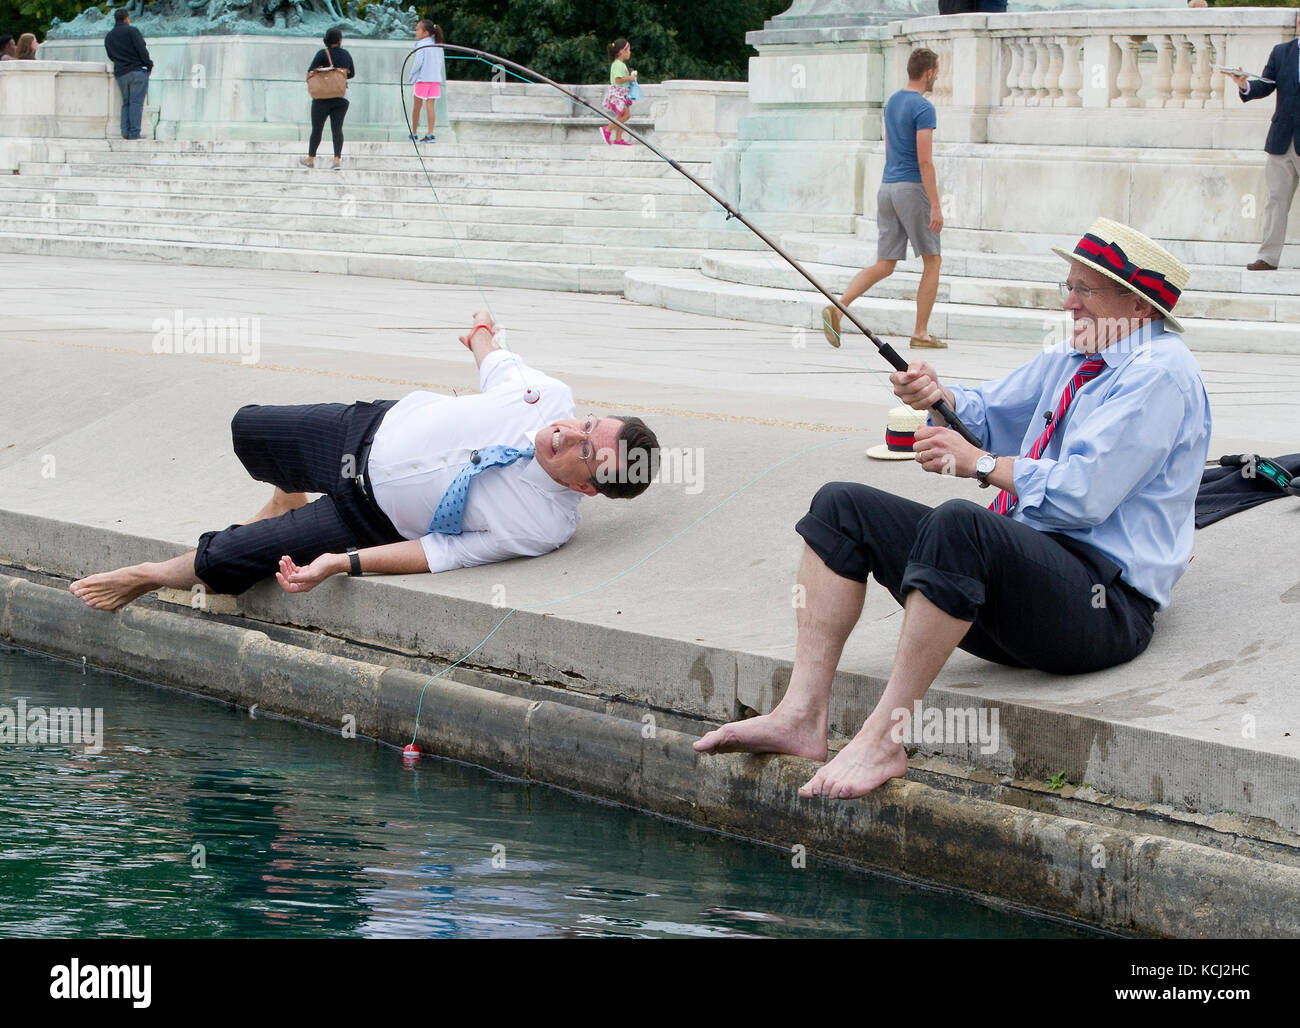 United States Representative Jack Kingston (Democrat of Georgia) catches a big 'fish', Stephen Colbert, host of the Comedy Central show 'The Colbert Report' at the U.S. Capitol Reflecting Pool in Washington, D.C. on Friday, October 3, 2014. Credit: Ron Sachs / CNP (RESTRICTION: NO New York or New Jersey Newspapers or newspapers within a 75 mile radius of New York City) /MediaPunch Stock Photo